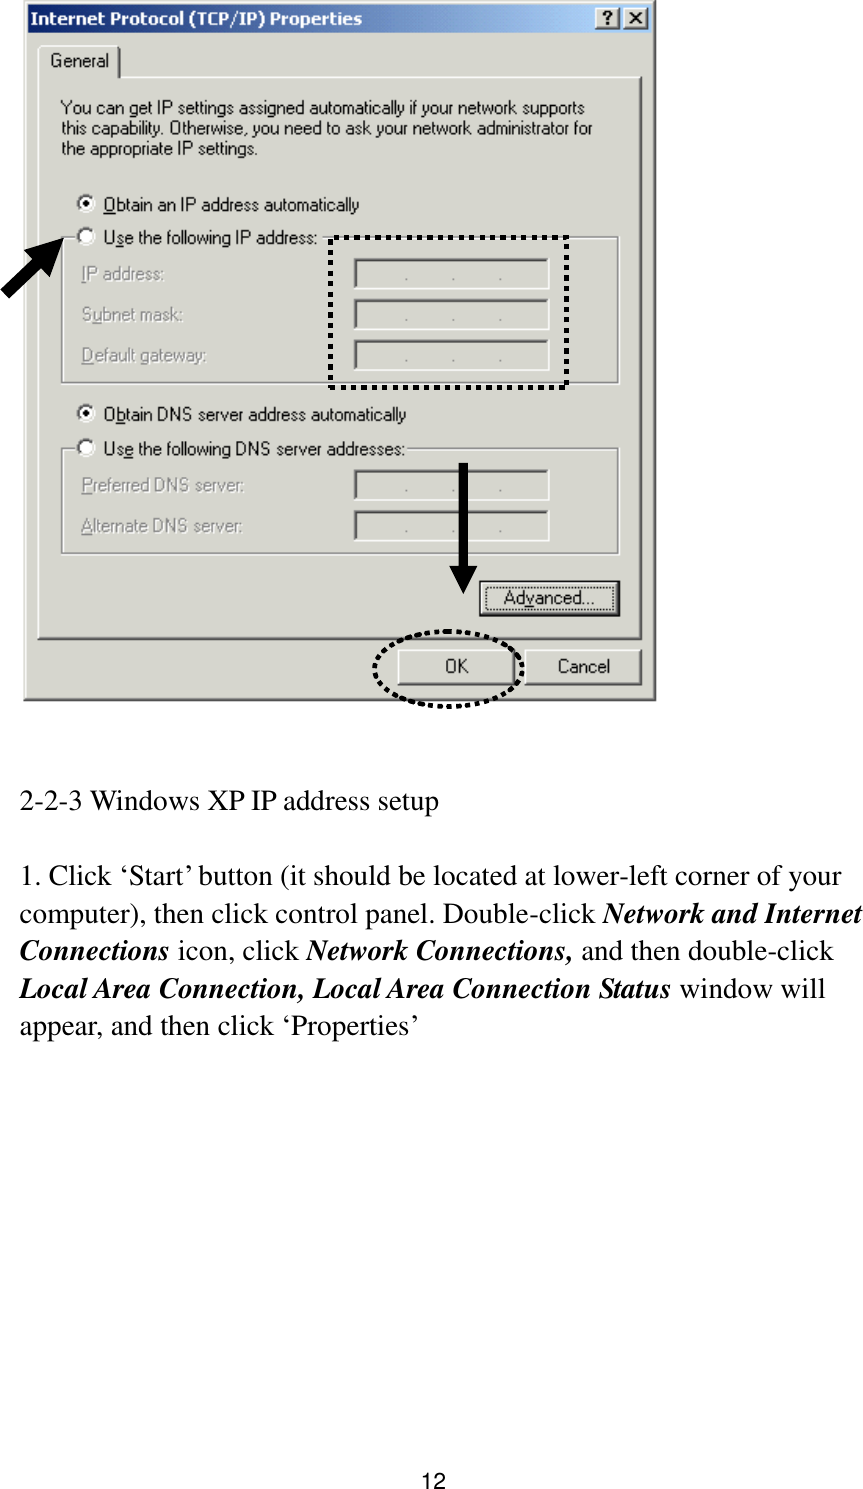 12    2-2-3 Windows XP IP address setup  1. Click „Start‟ button (it should be located at lower-left corner of your computer), then click control panel. Double-click Network and Internet Connections icon, click Network Connections, and then double-click Local Area Connection, Local Area Connection Status window will appear, and then click „Properties‟  